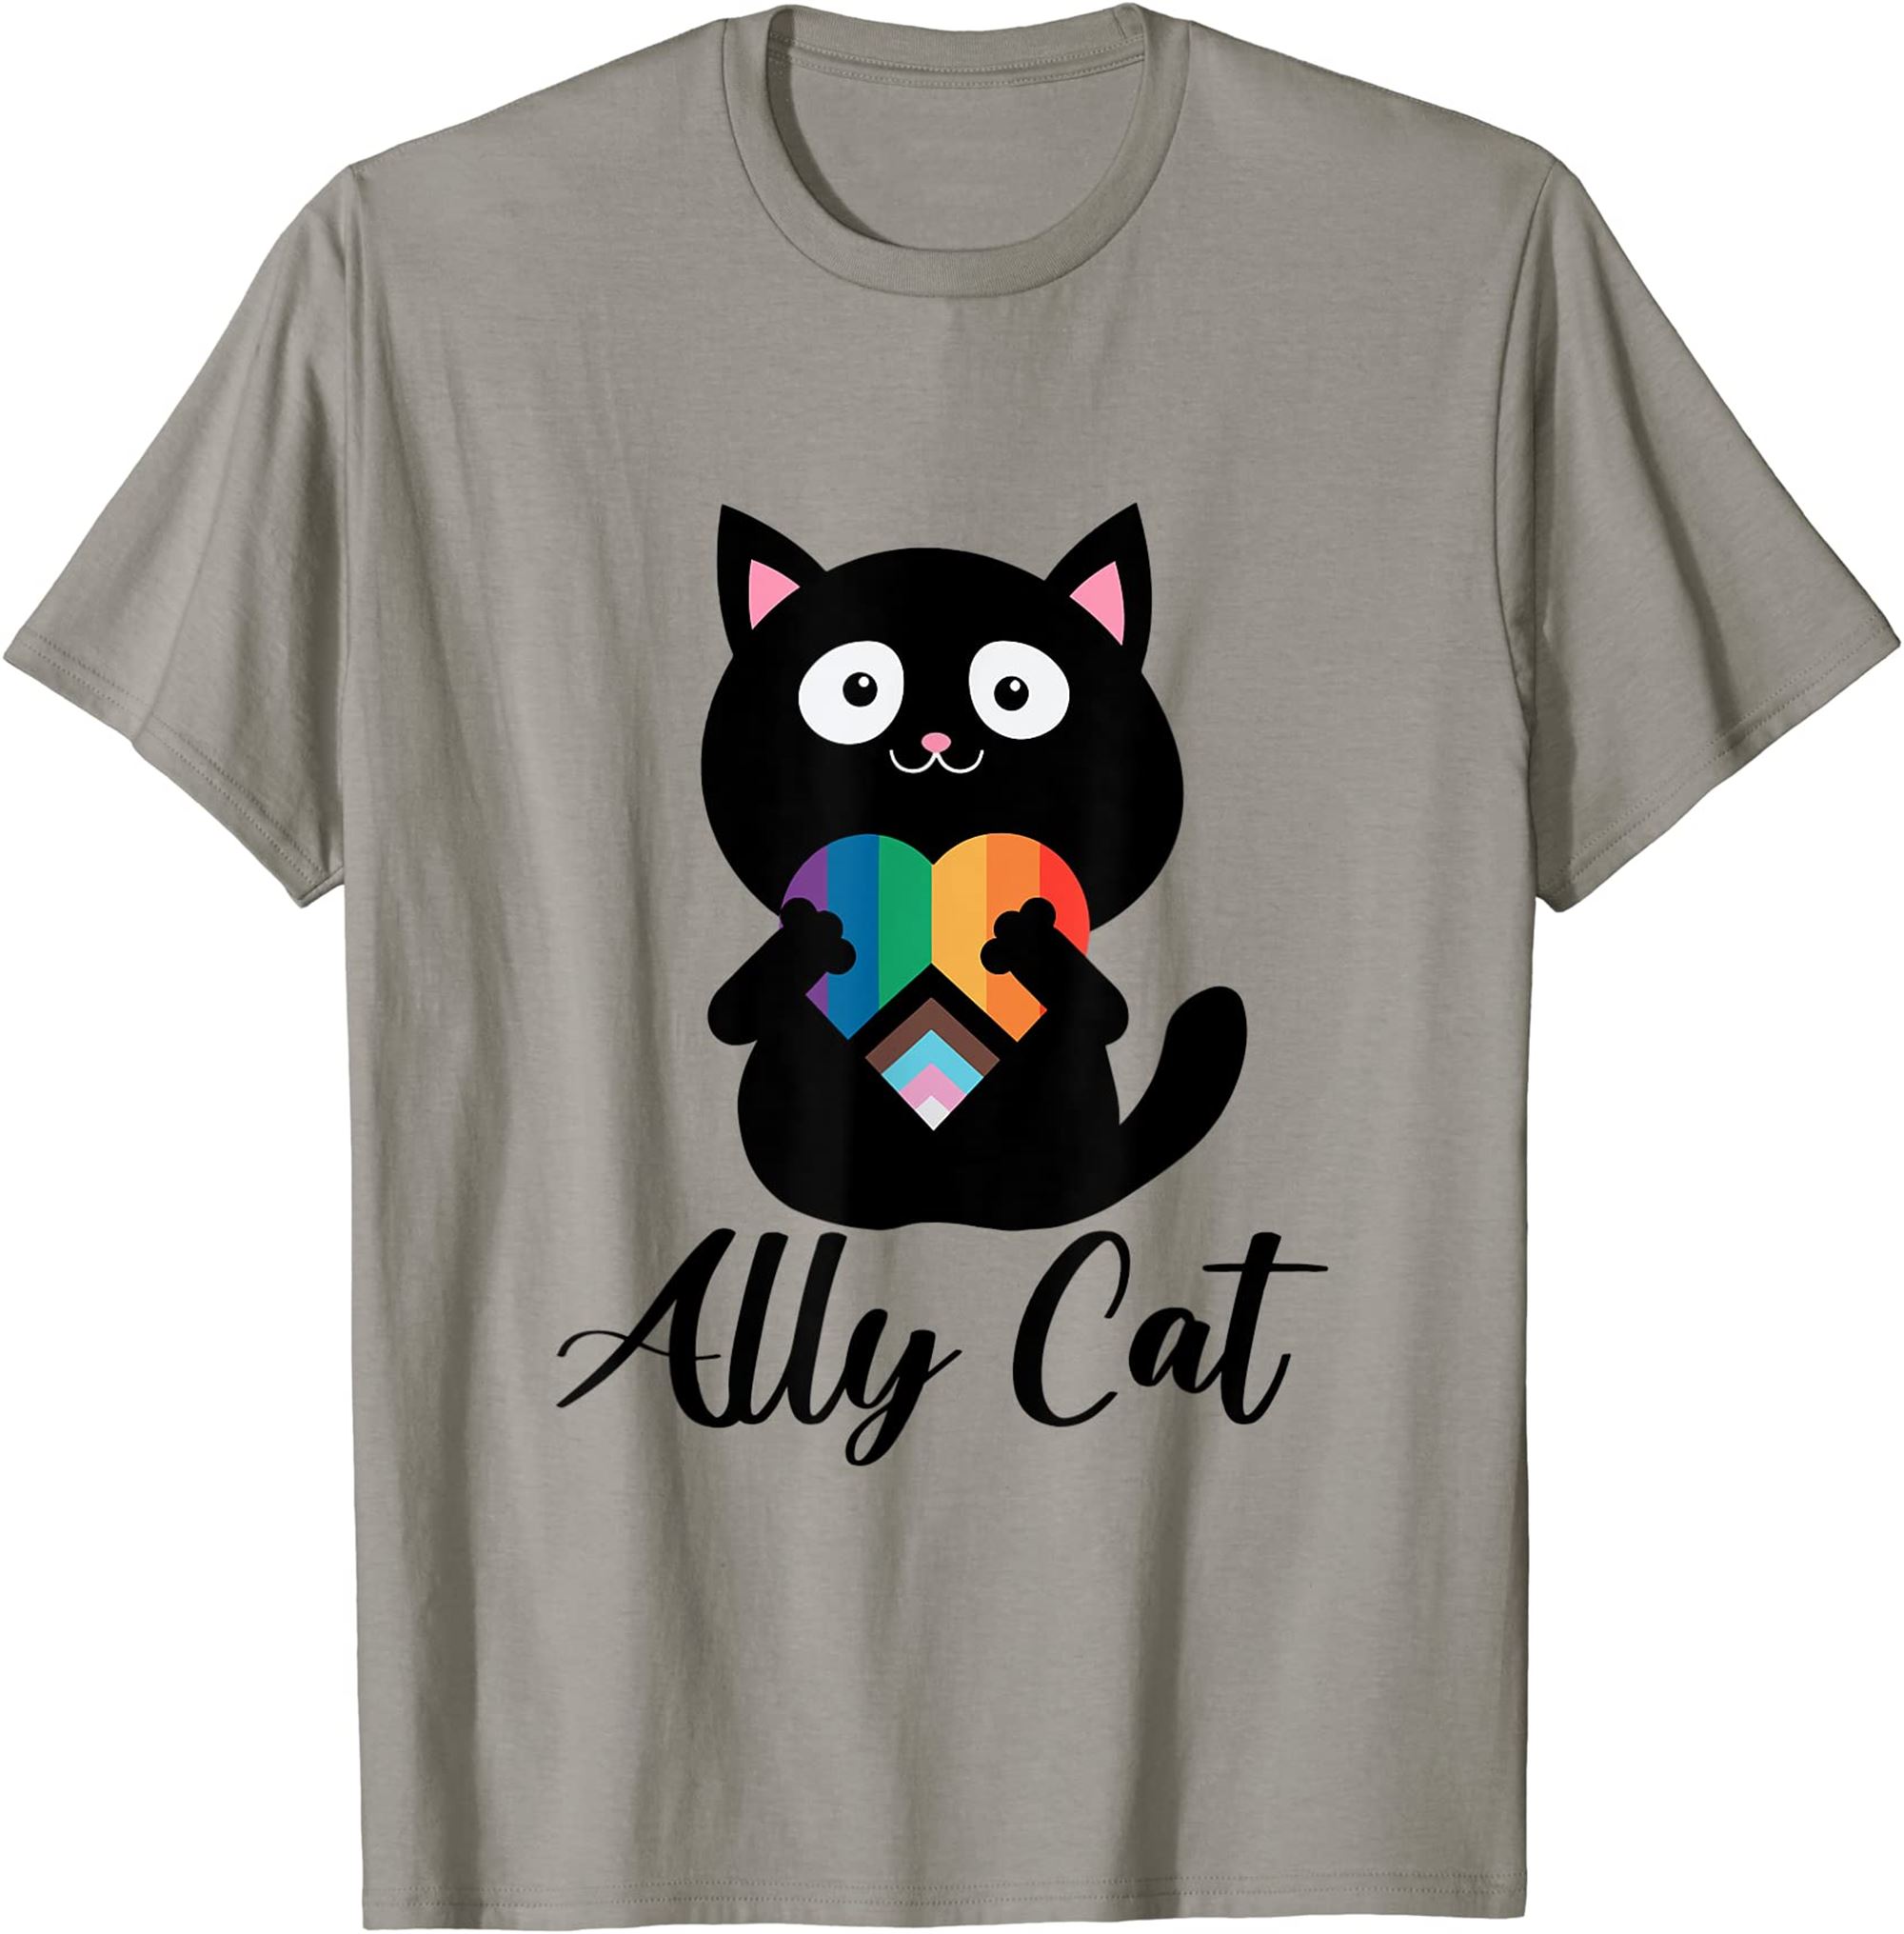 Ally Cat Lgbt Gay Pride Flag Heart Cat Pride Retro Cat Gay T-shirt Plus Size Up To 5xl